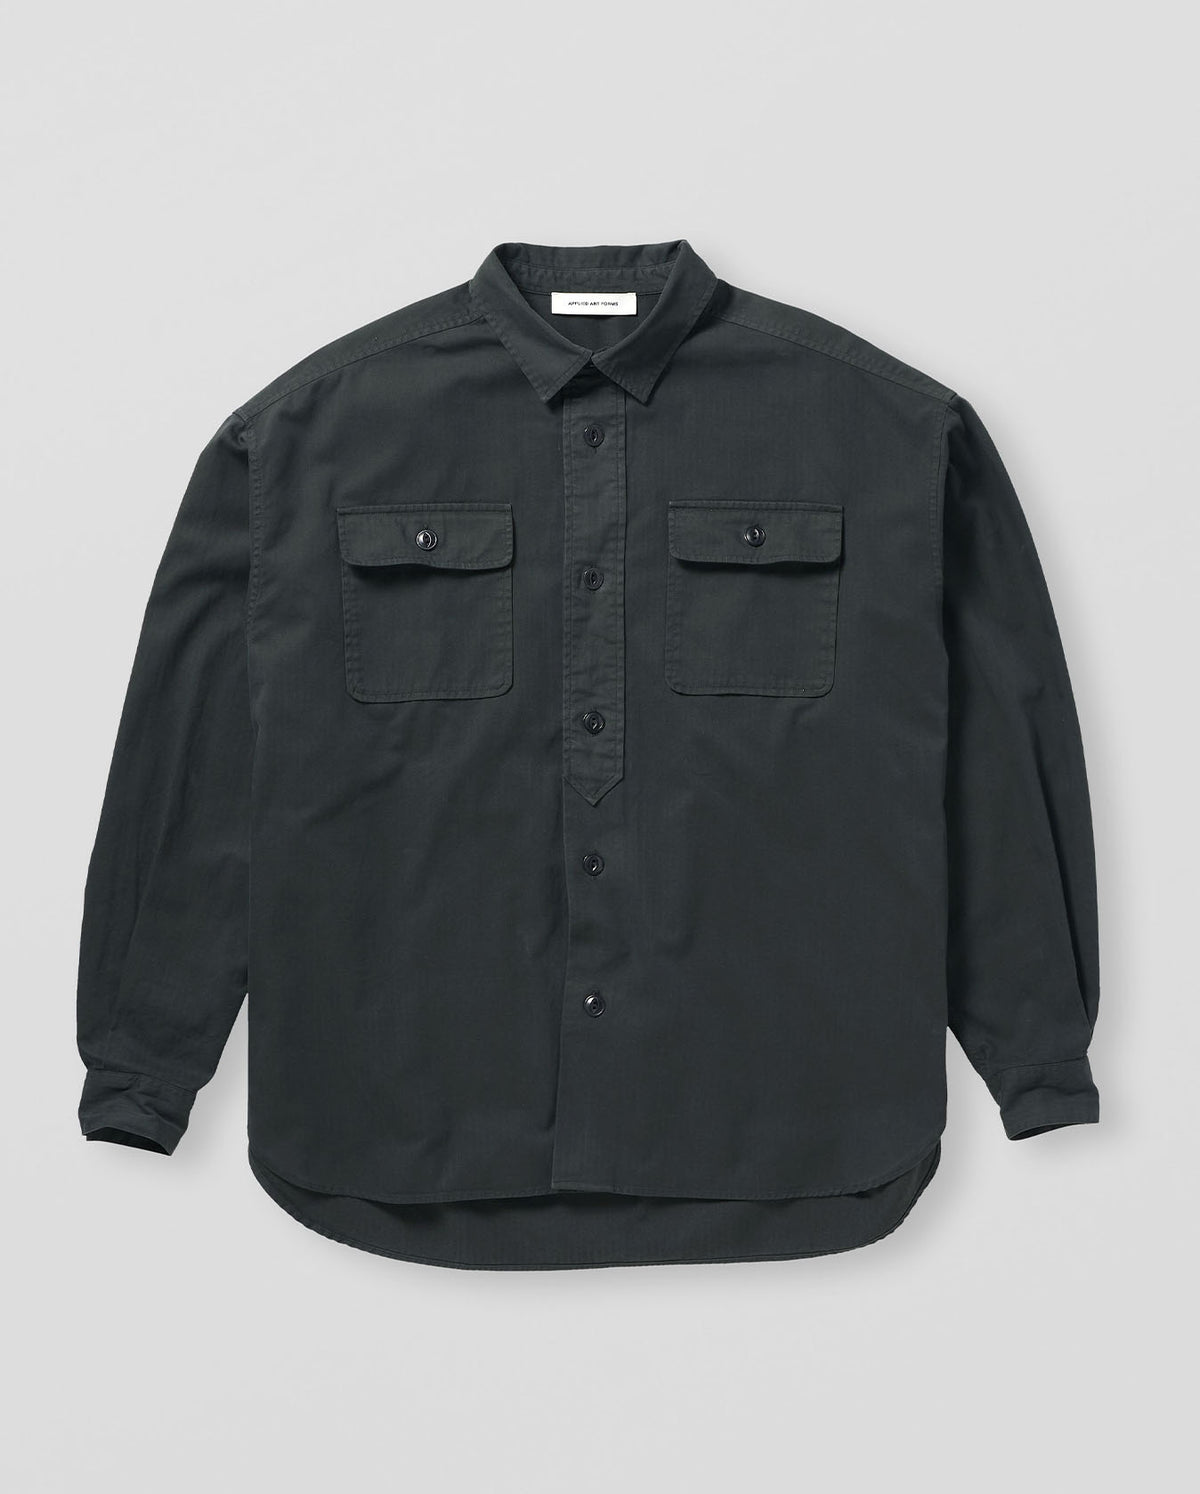 Overshirt With Double Chest Pockets - Charcoal